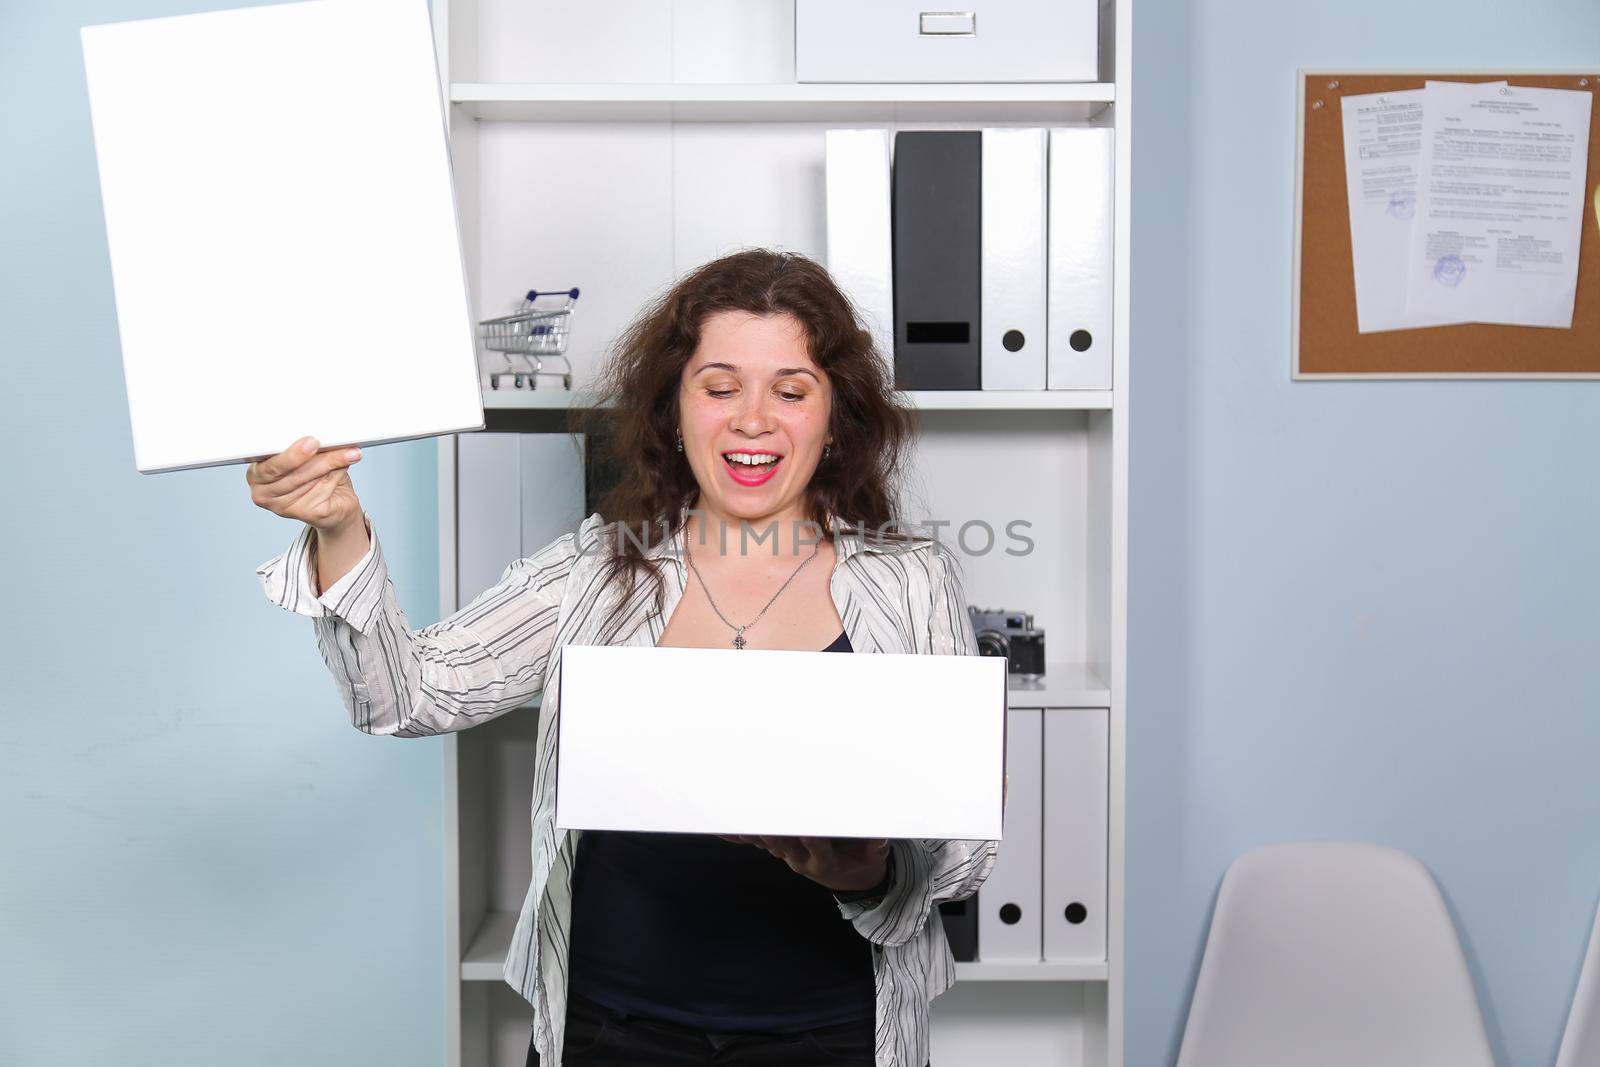 Concept of dismissal from work. Happy woman with carton box with her stationery stuff, girl was fired from her job. by Satura86